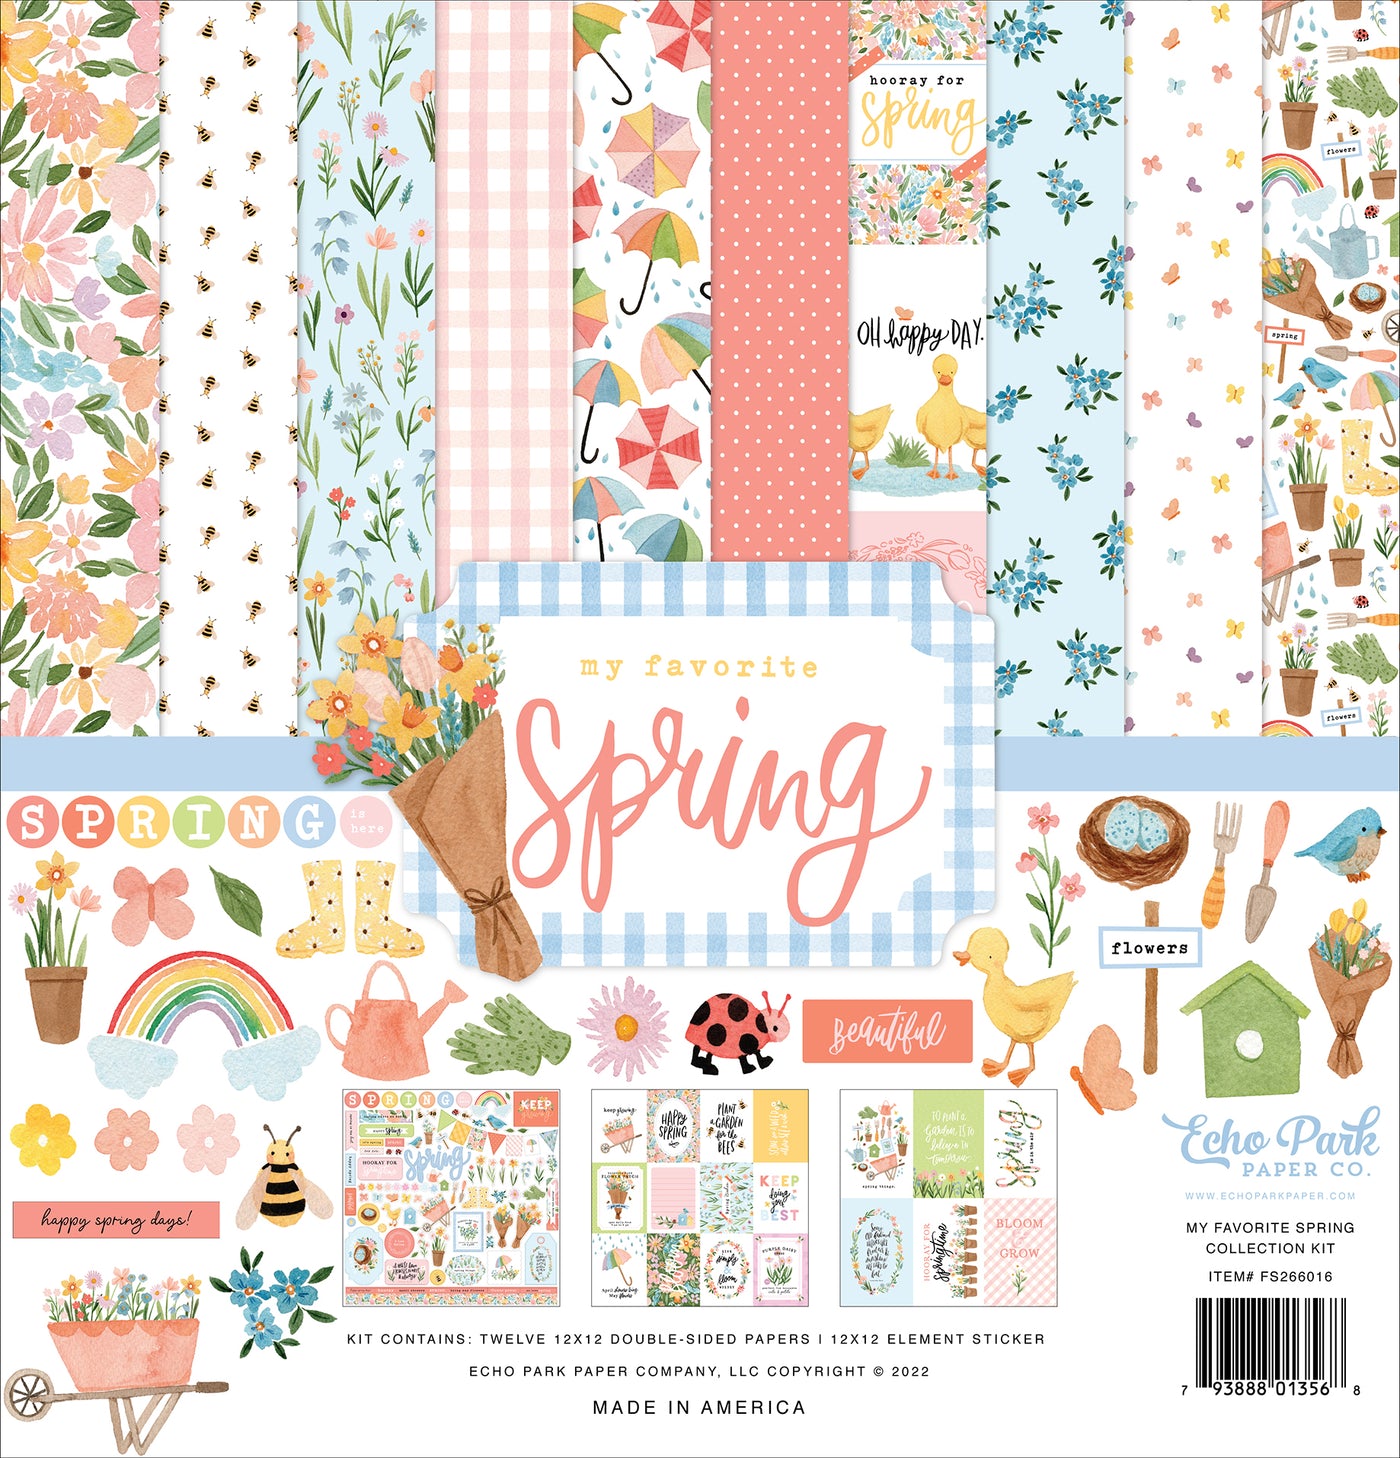 Spring is in the air! Breathe some new life into your crafts with this beautiful new kit from Echo Park!